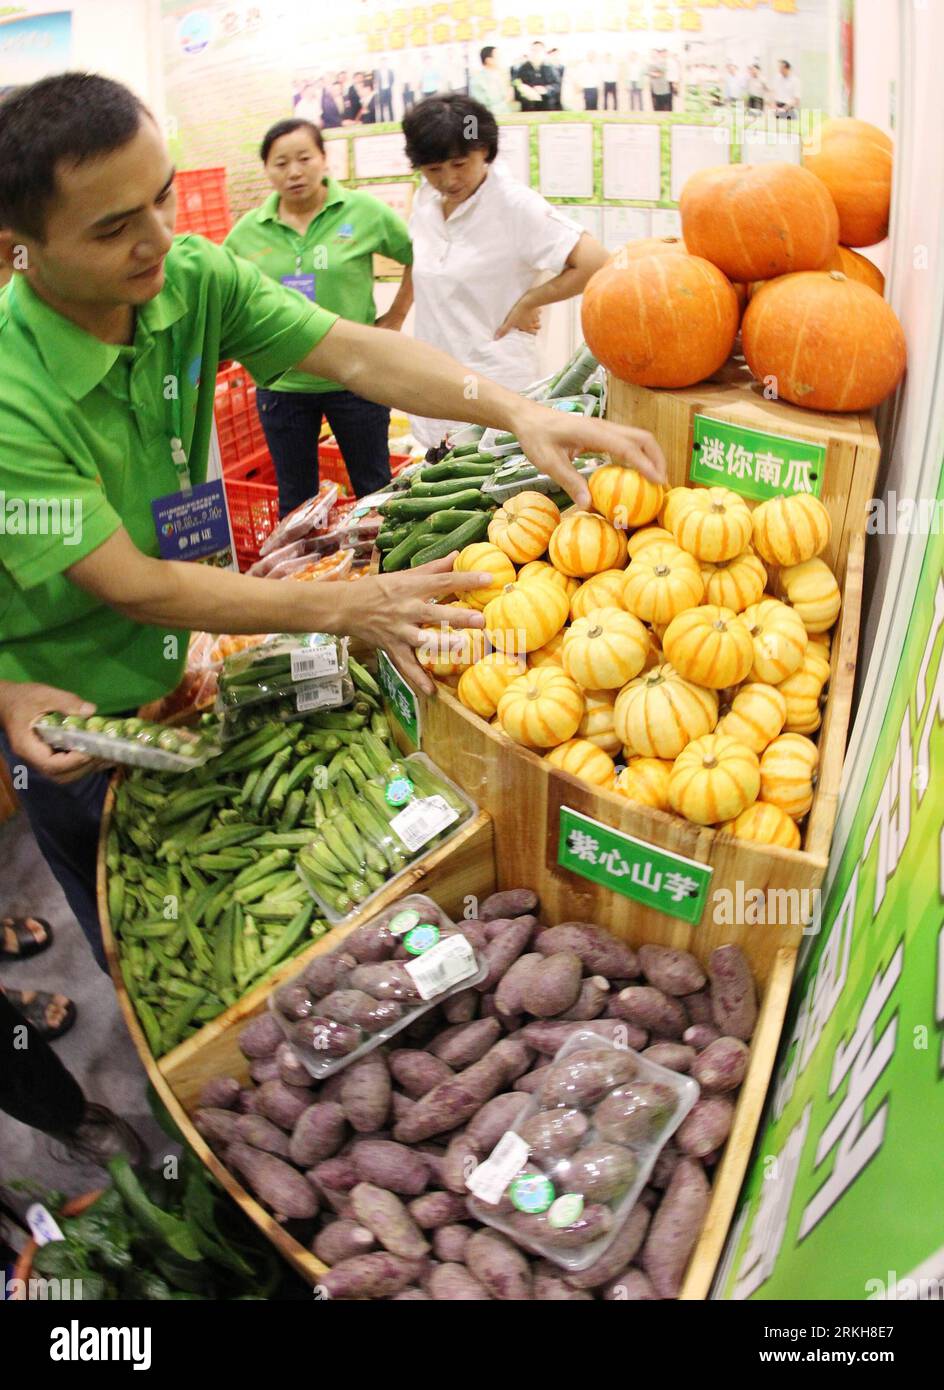 Bildnummer: 55715280  Datum: 12.08.2011  Copyright: imago/Xinhua (110812) -- SUZHOU, Aug. 12, 2011 (Xinhua) -- A participant shows farm products during the 2011 Cross-Strait Agricultural Products Trade Fair held in Suzhou City, east China s Jiangsu Province, Aug. 12, 2011. The trade fair kicked off here Friday. (Xinhua/Wang Jianzhong) (dtf) #CHINA-SUZHOU-AGRICULTURE-FAIR (CN) PUBLICATIONxNOTxINxCHN Wirtschaft Messe Lebensmittel Lebensmittelmesse Landwirtschaft Landwirtschaftsmesse x0x xst 2011 hoch     Bildnummer 55715280 Date 12 08 2011 Copyright Imago XINHUA  Suzhou Aug 12 2011 XINHUA a Part Stock Photo